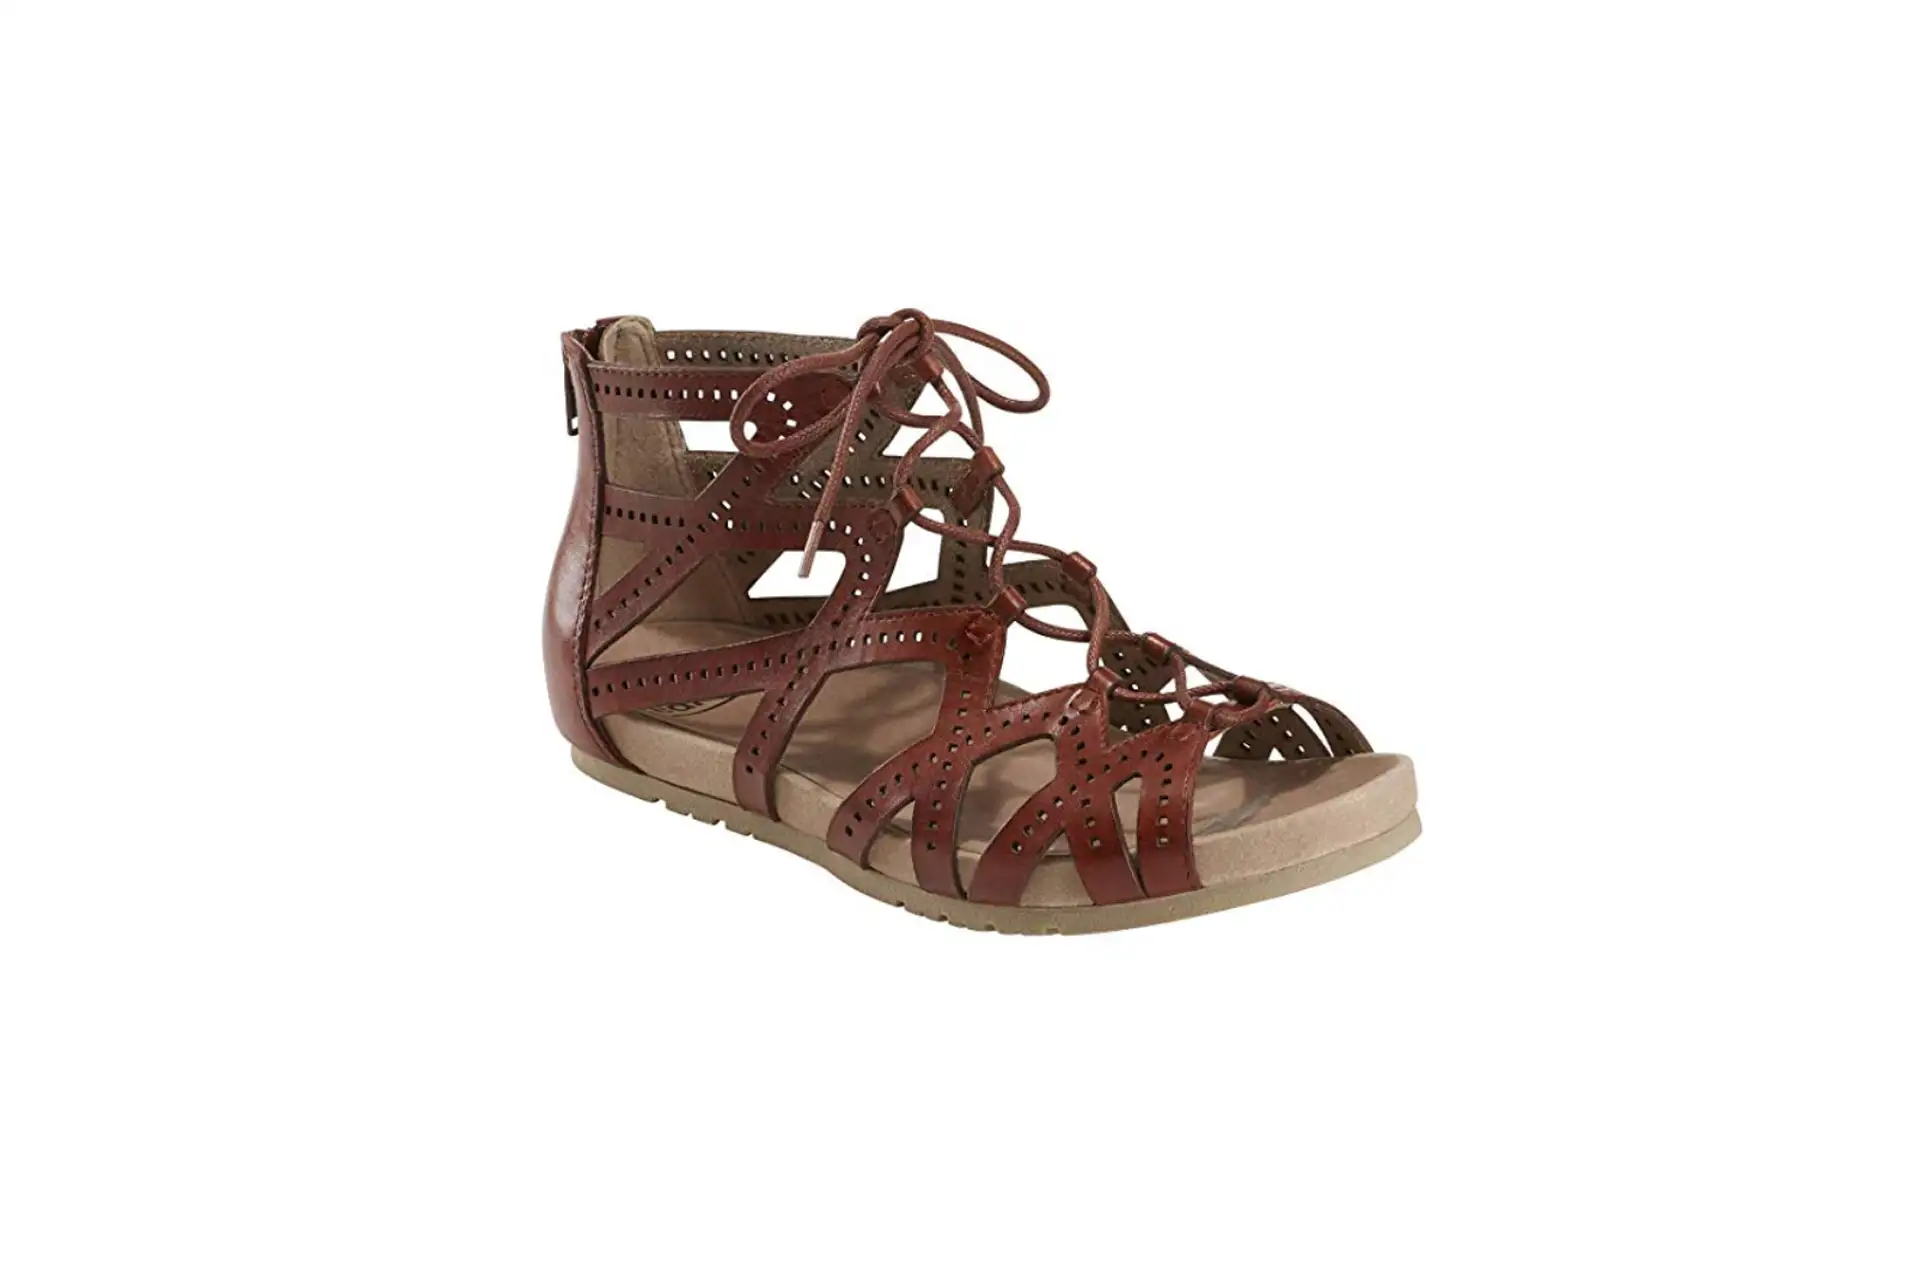 Earth Shoes Linden Gladiator Sandals; Courtesy of Amazon